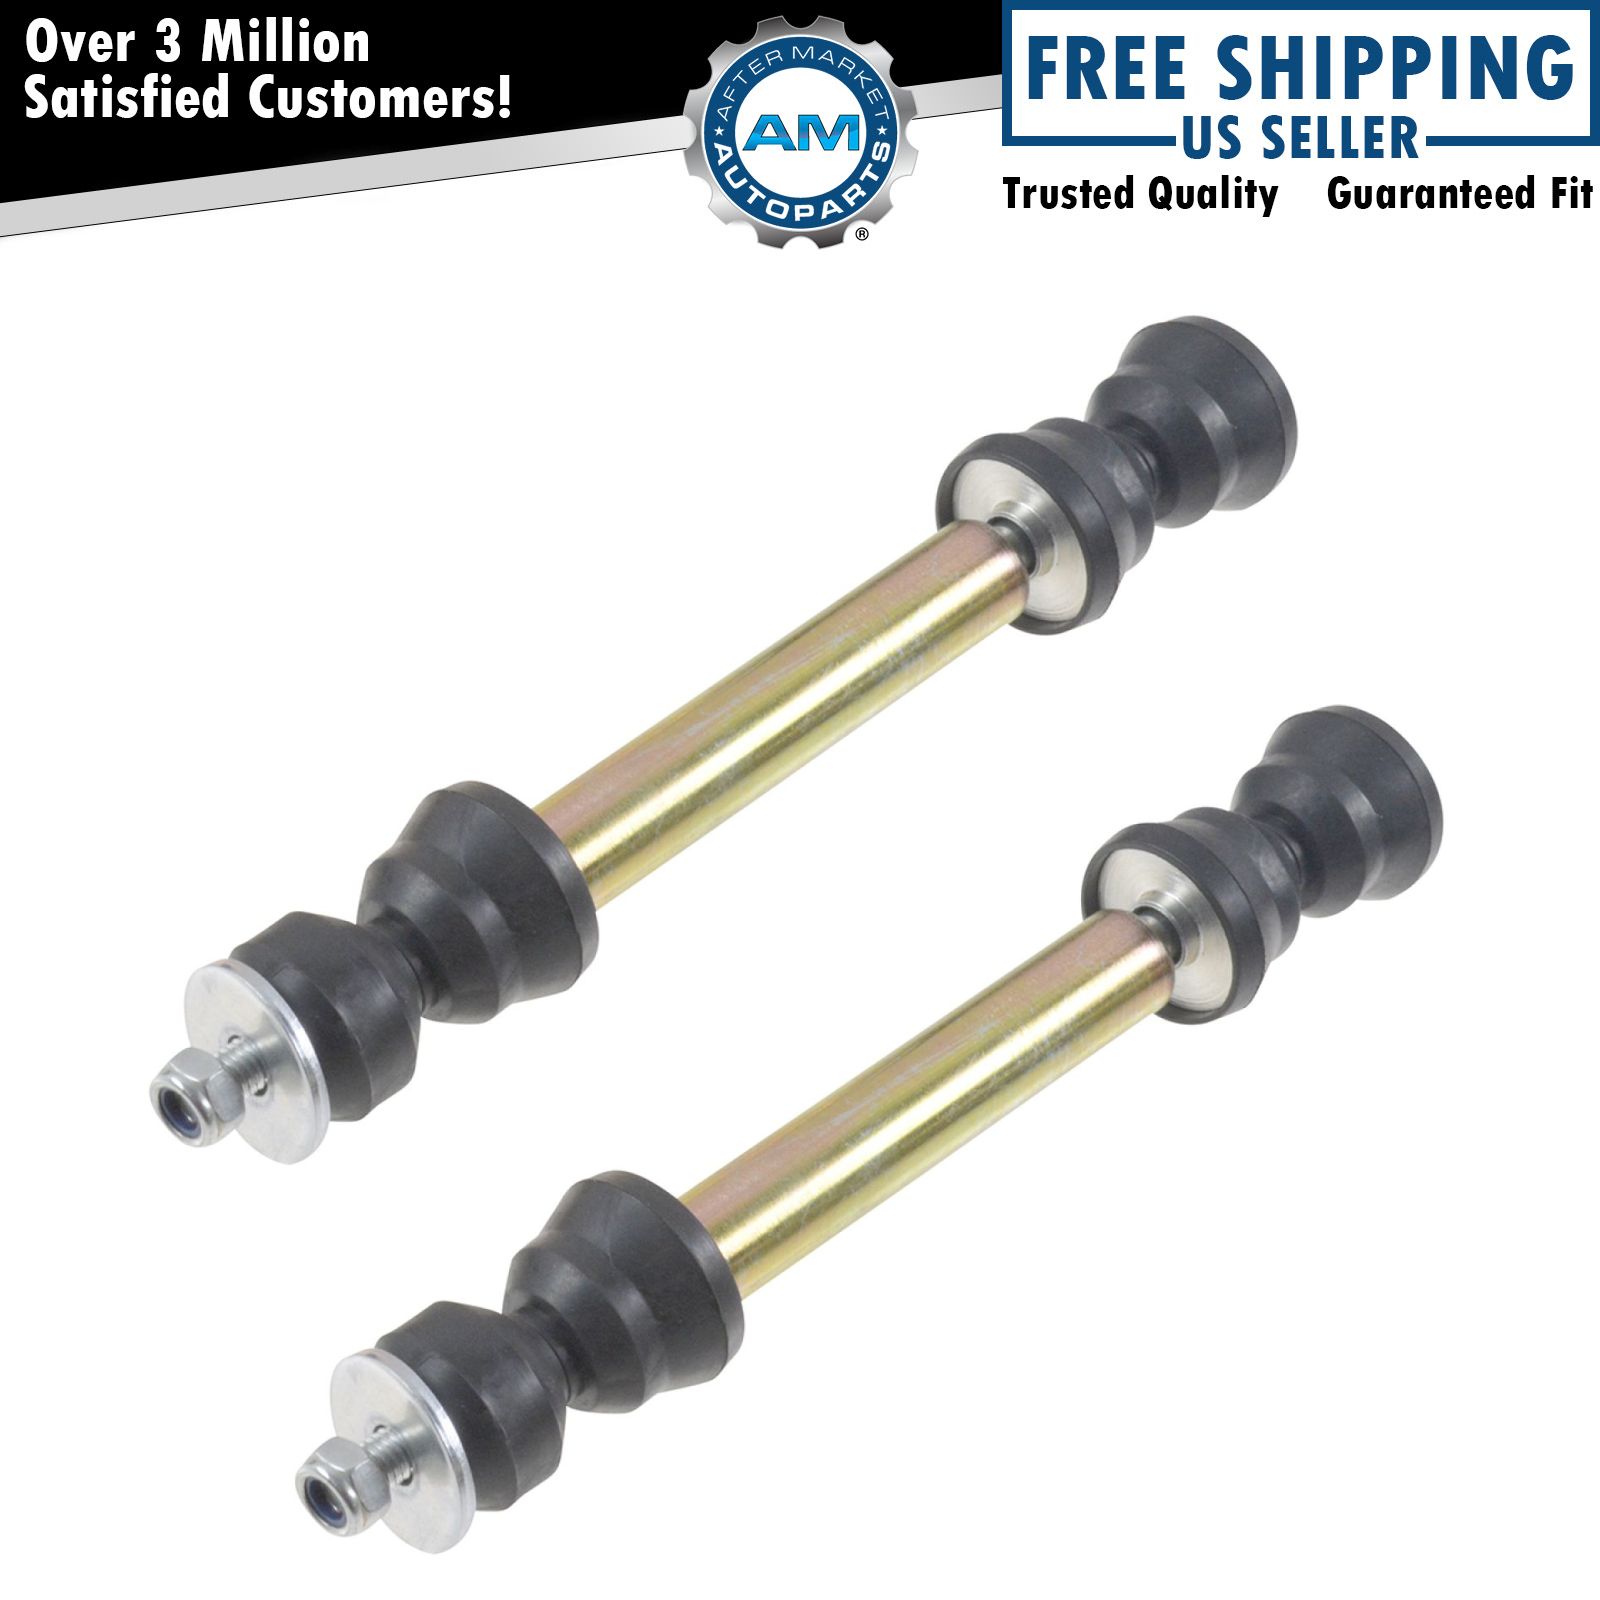 Front Sway Bar Link Kit Pair Set of 2 for Chevy GMC Pickup Truck SUV 4WD 4x4